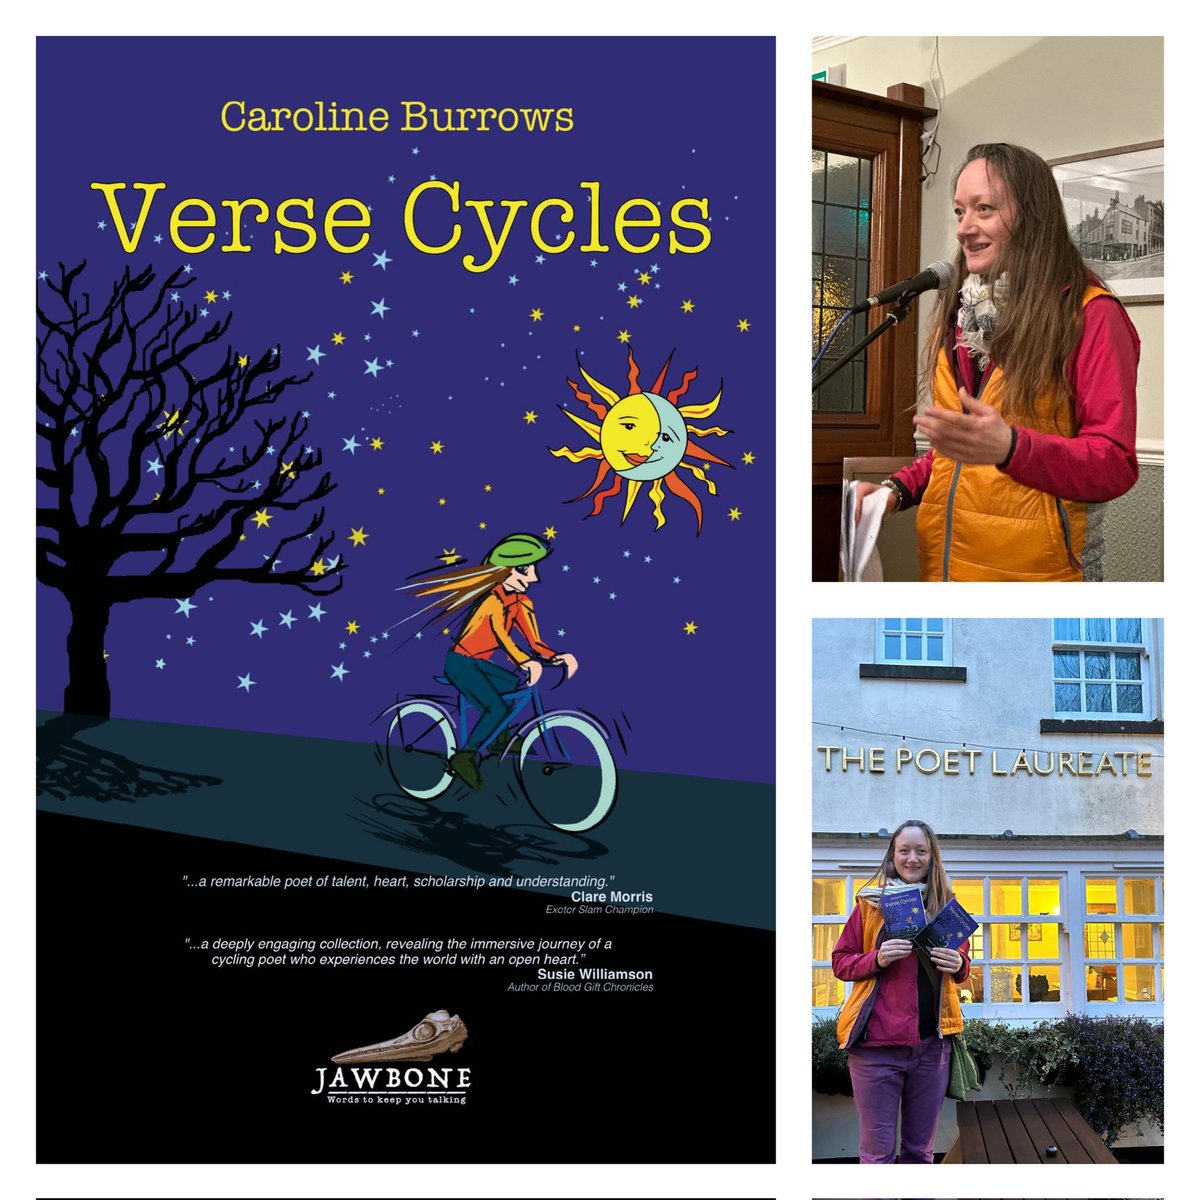 Had a grand time reading #poems from Verse Cycles at The Poet Laureate, Poundbury. The fellow poets, storytellers+musicians made for a fab night.
Collection: wessex.media/publications/c…
#livepoetry #versecycles #versecycle #carolineburrows #CyclePoet #bikebardontour #poetrycollection